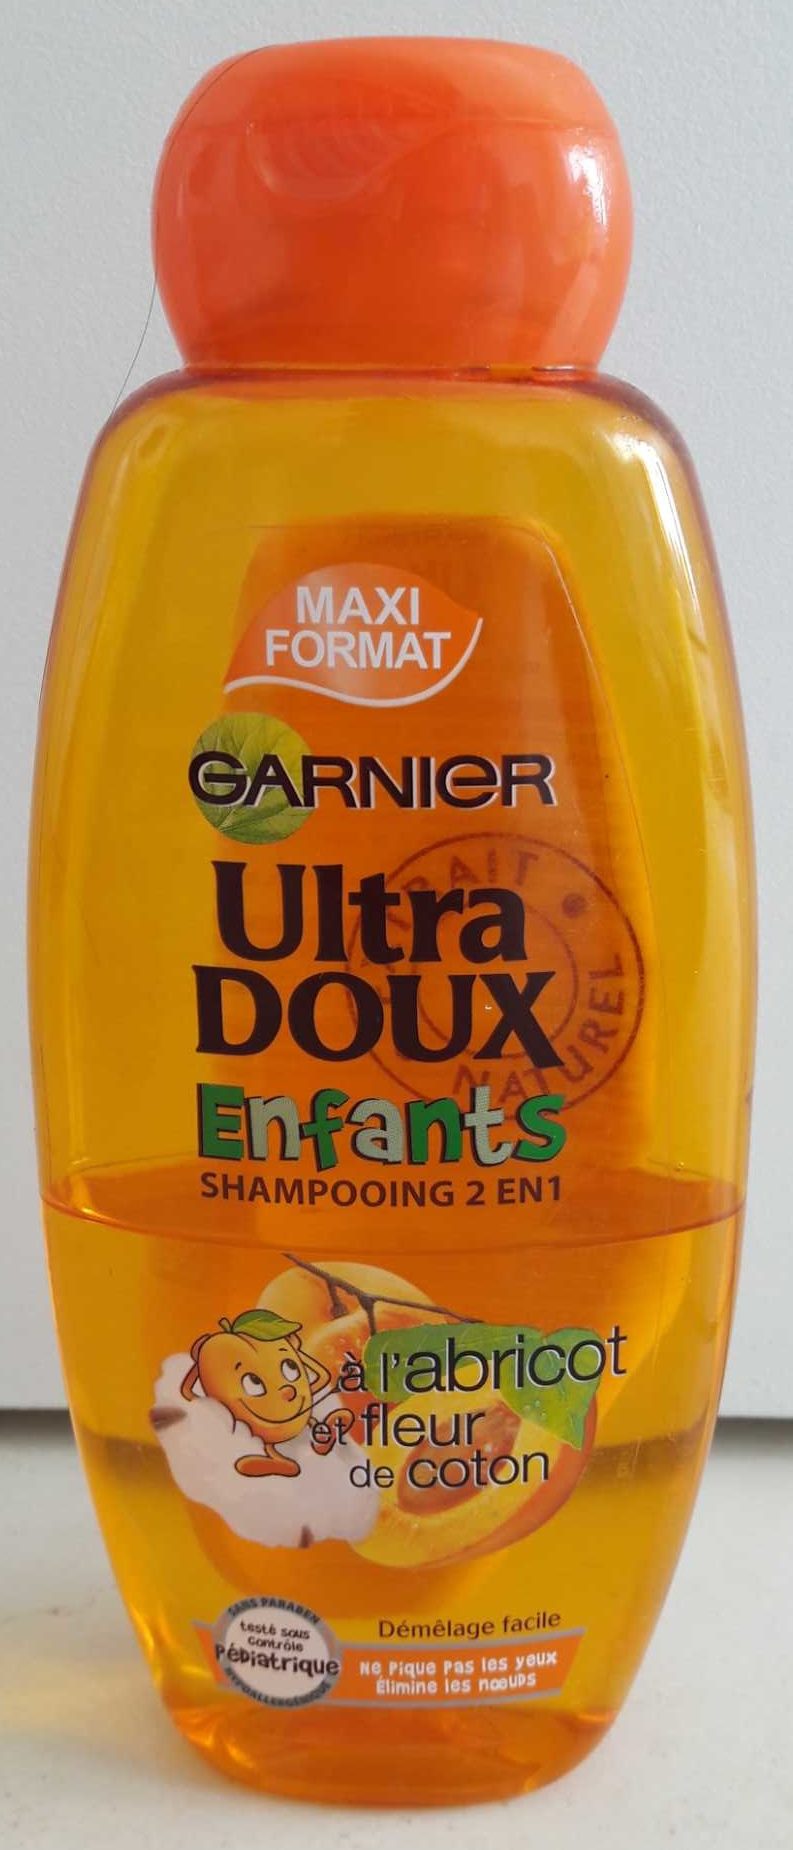 Shampooing 2 en 1 - Tuote - fr